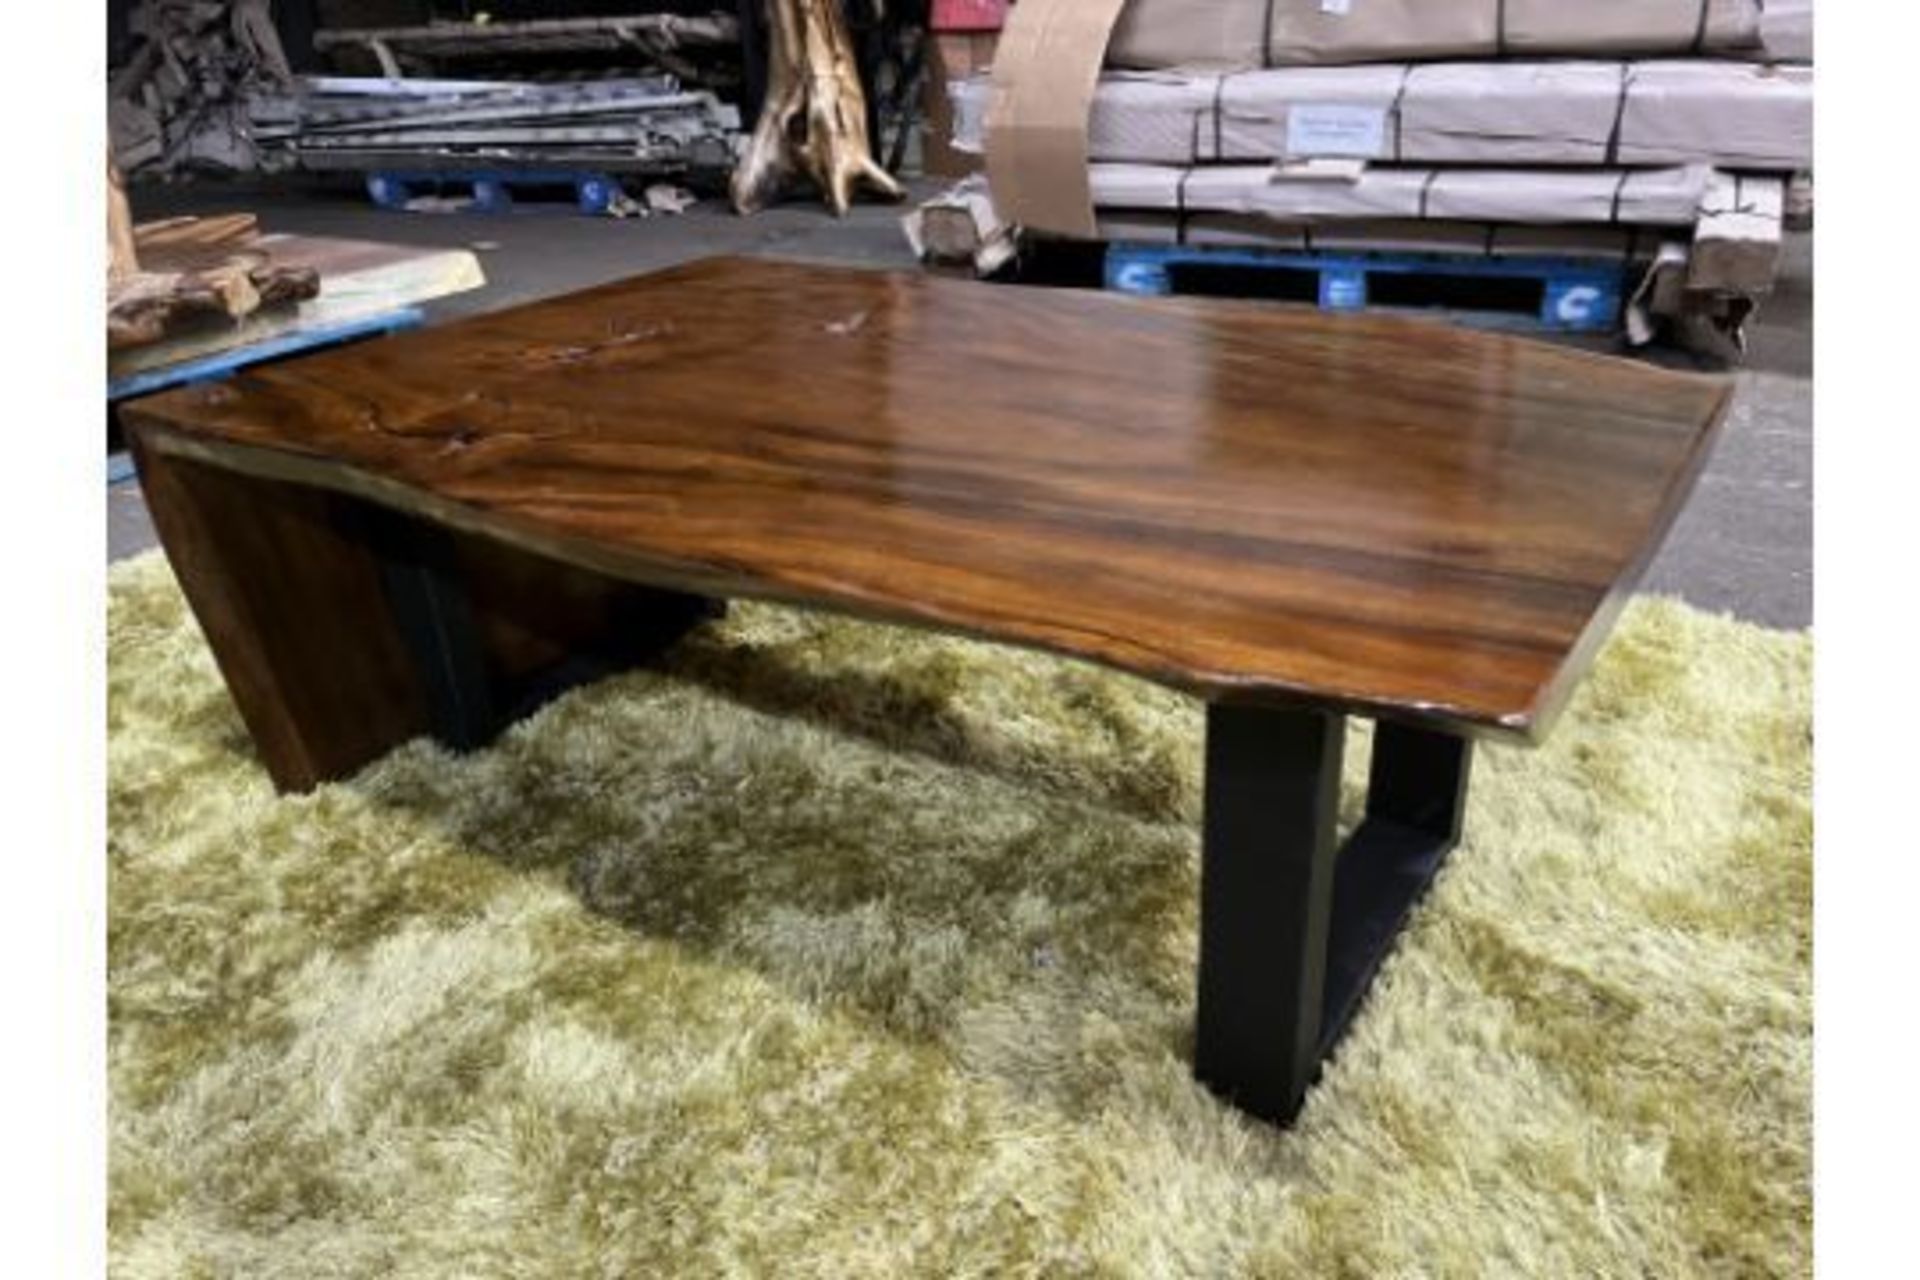 BRAND NEW SOLID WOODEN SUAR L COFFEE TABLE 120 X 60 X 45 RRP £1295 - Image 4 of 5